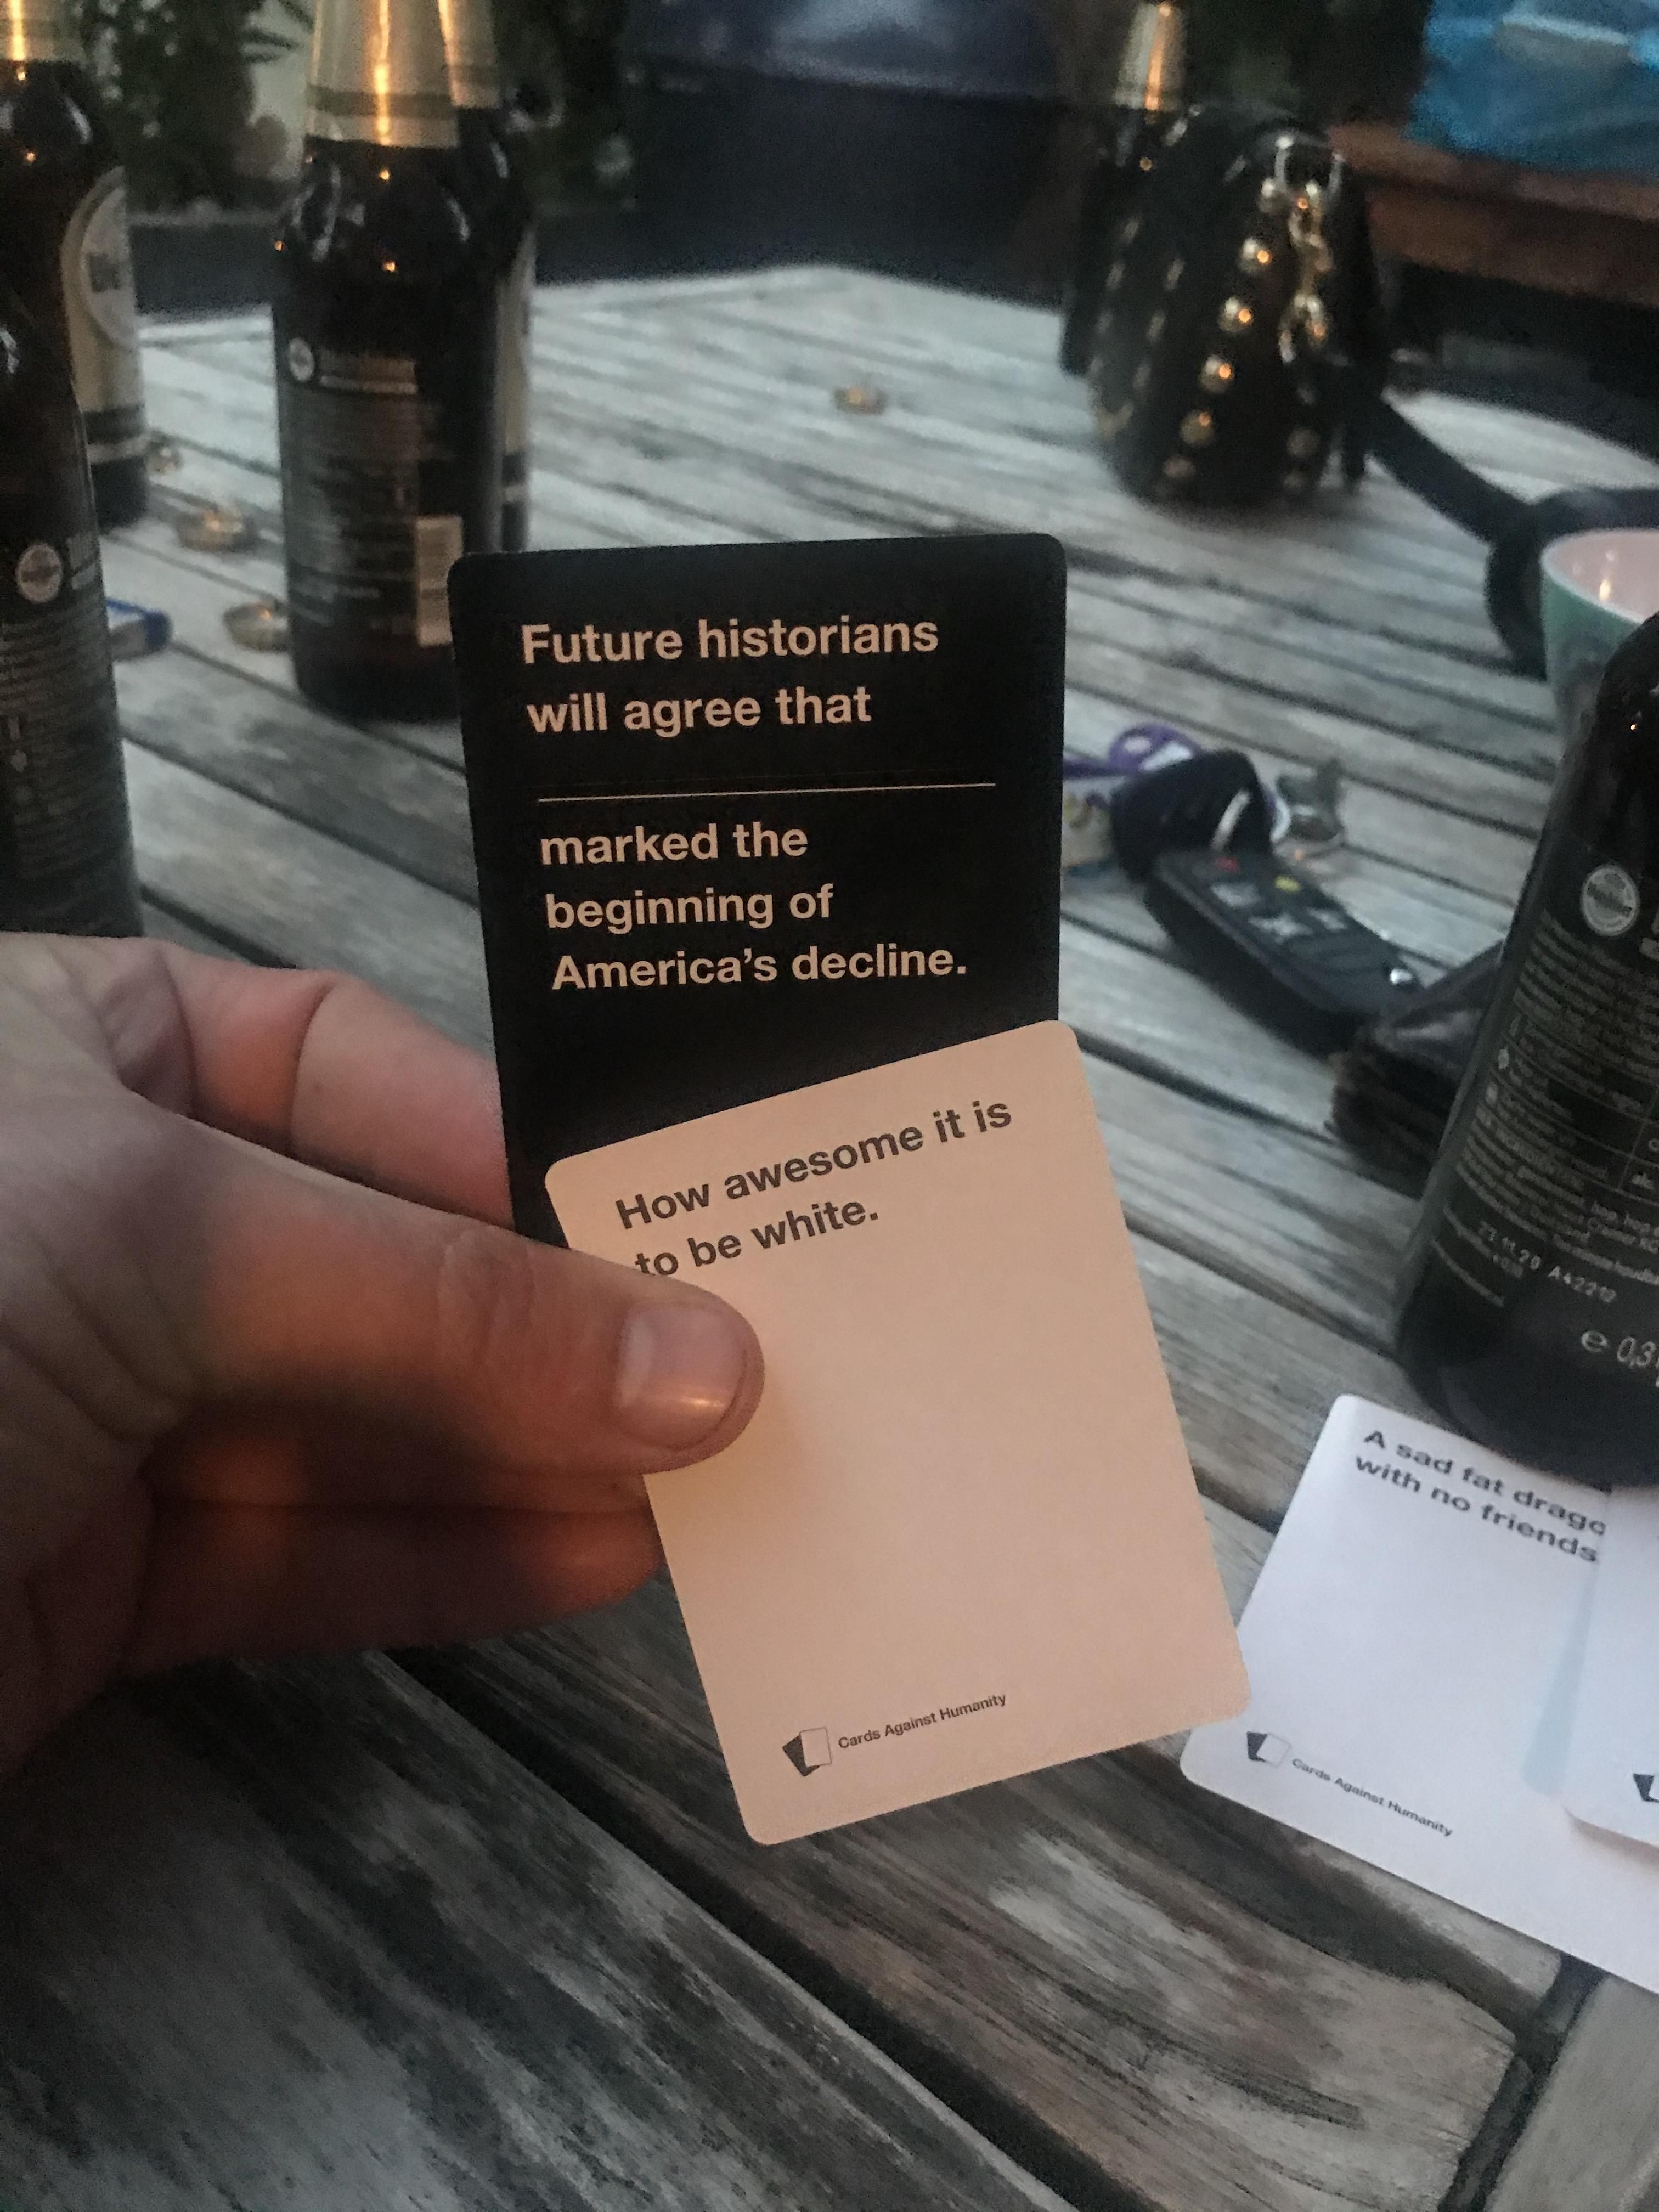 People still doing cards against humanity?